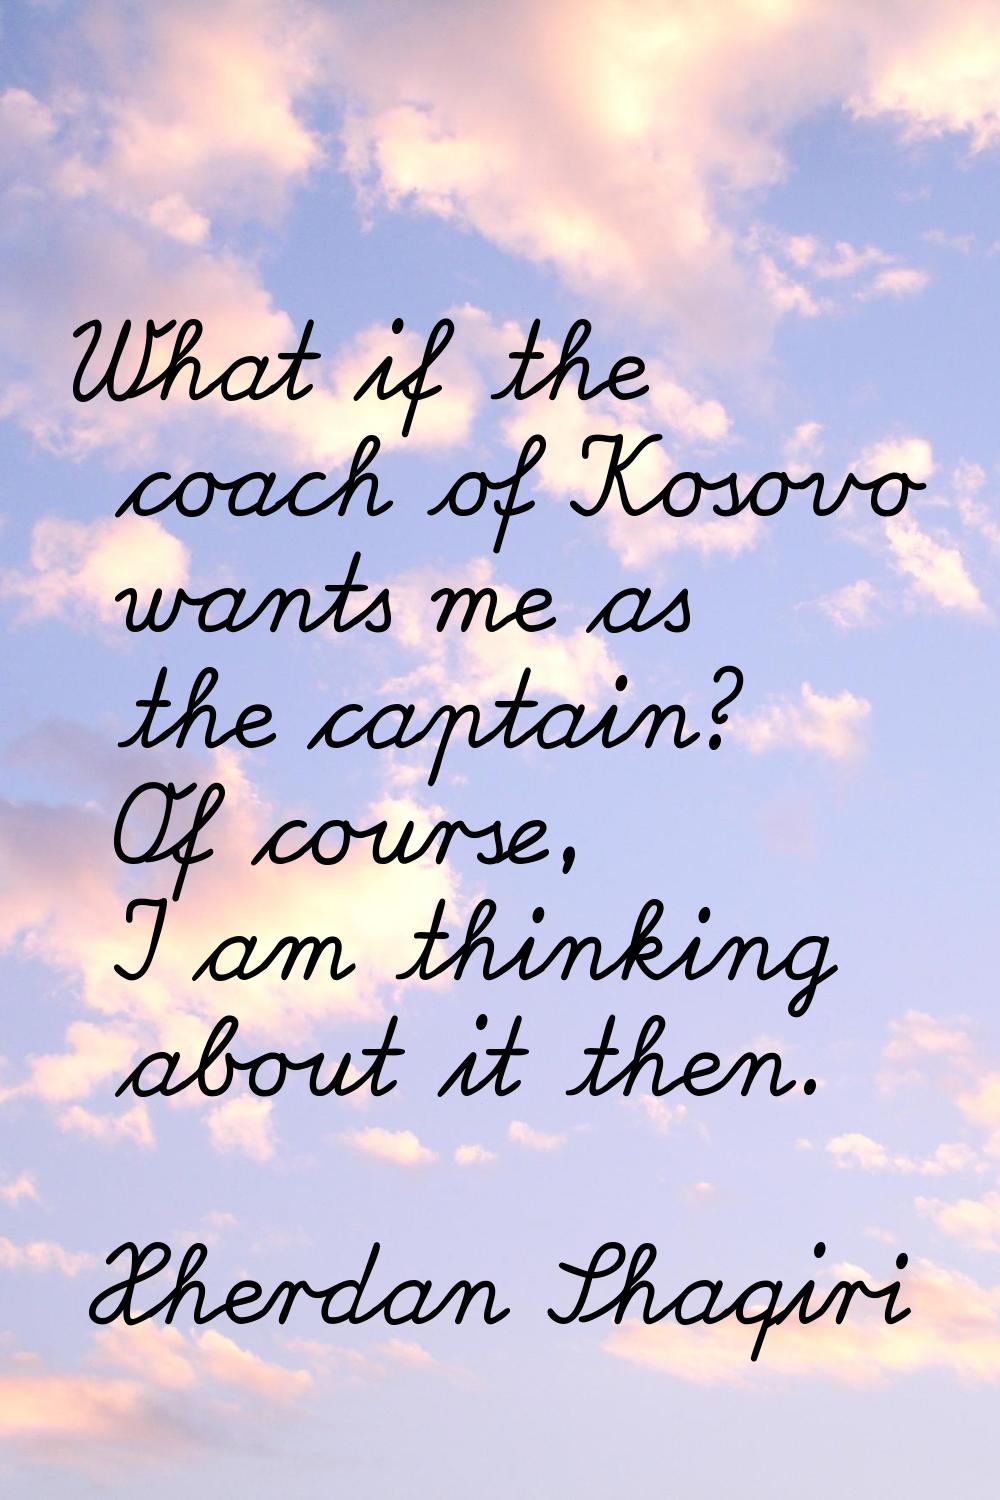 What if the coach of Kosovo wants me as the captain? Of course, I am thinking about it then.